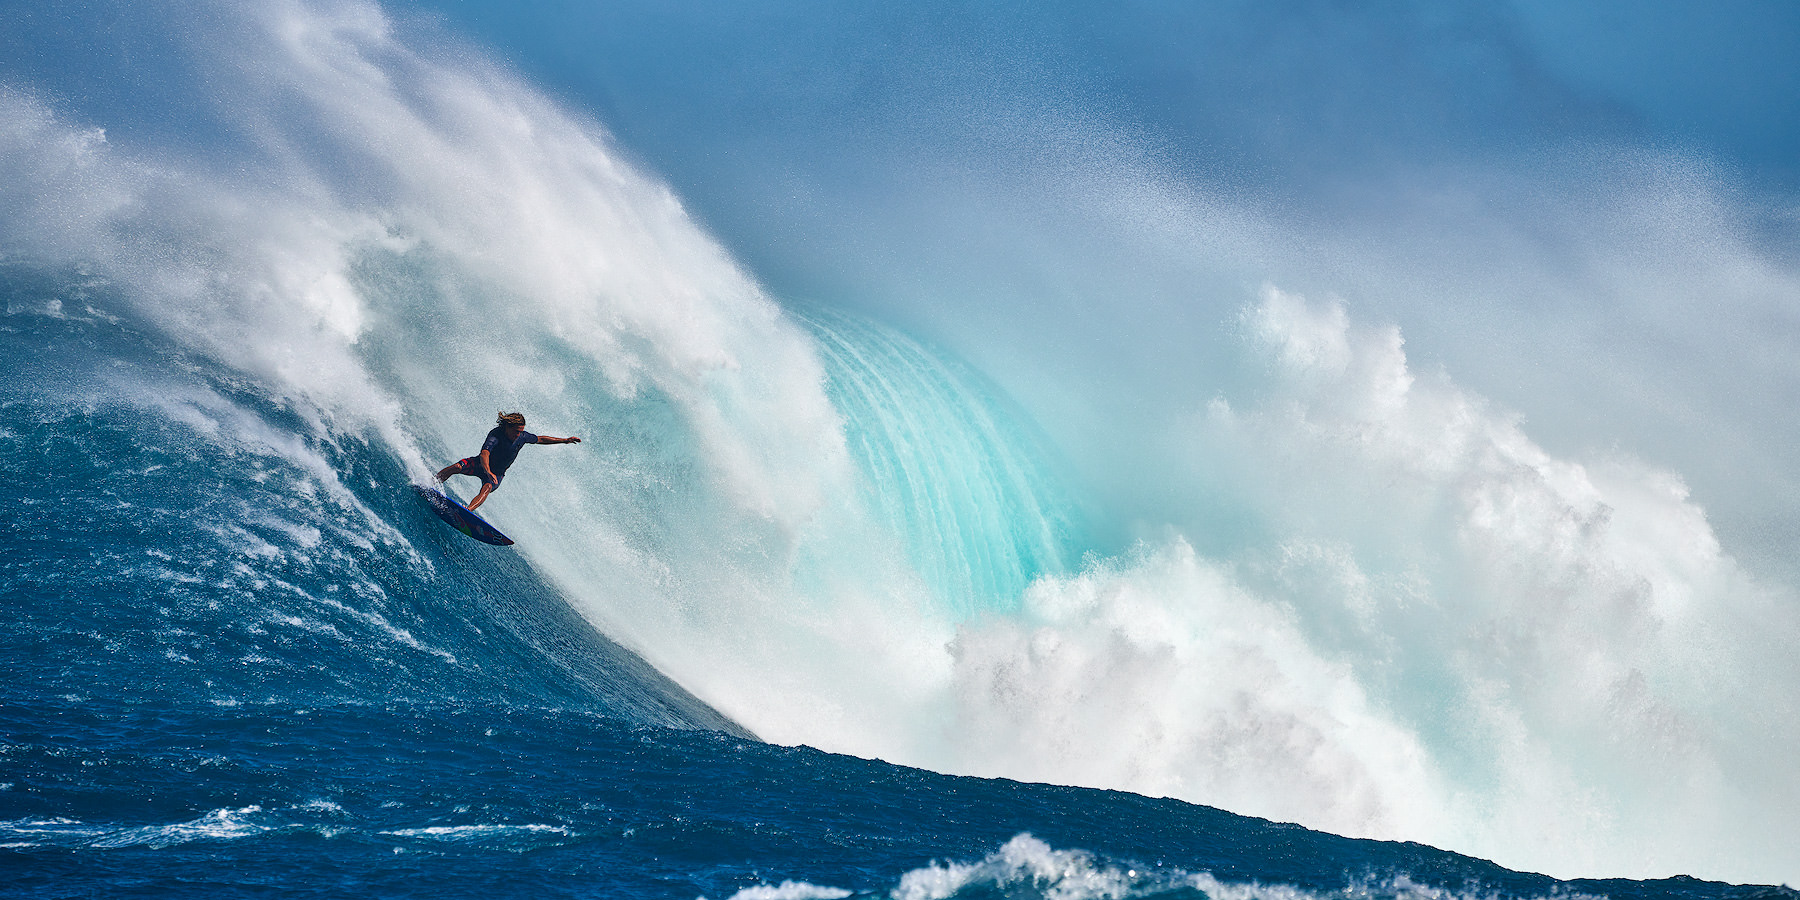 famous big wave surfer Kai Lenny surfing Jaws (Peahi) on the north shore of Maui showing the size and scale of this giant wave.  Hawaii Wave Photography 